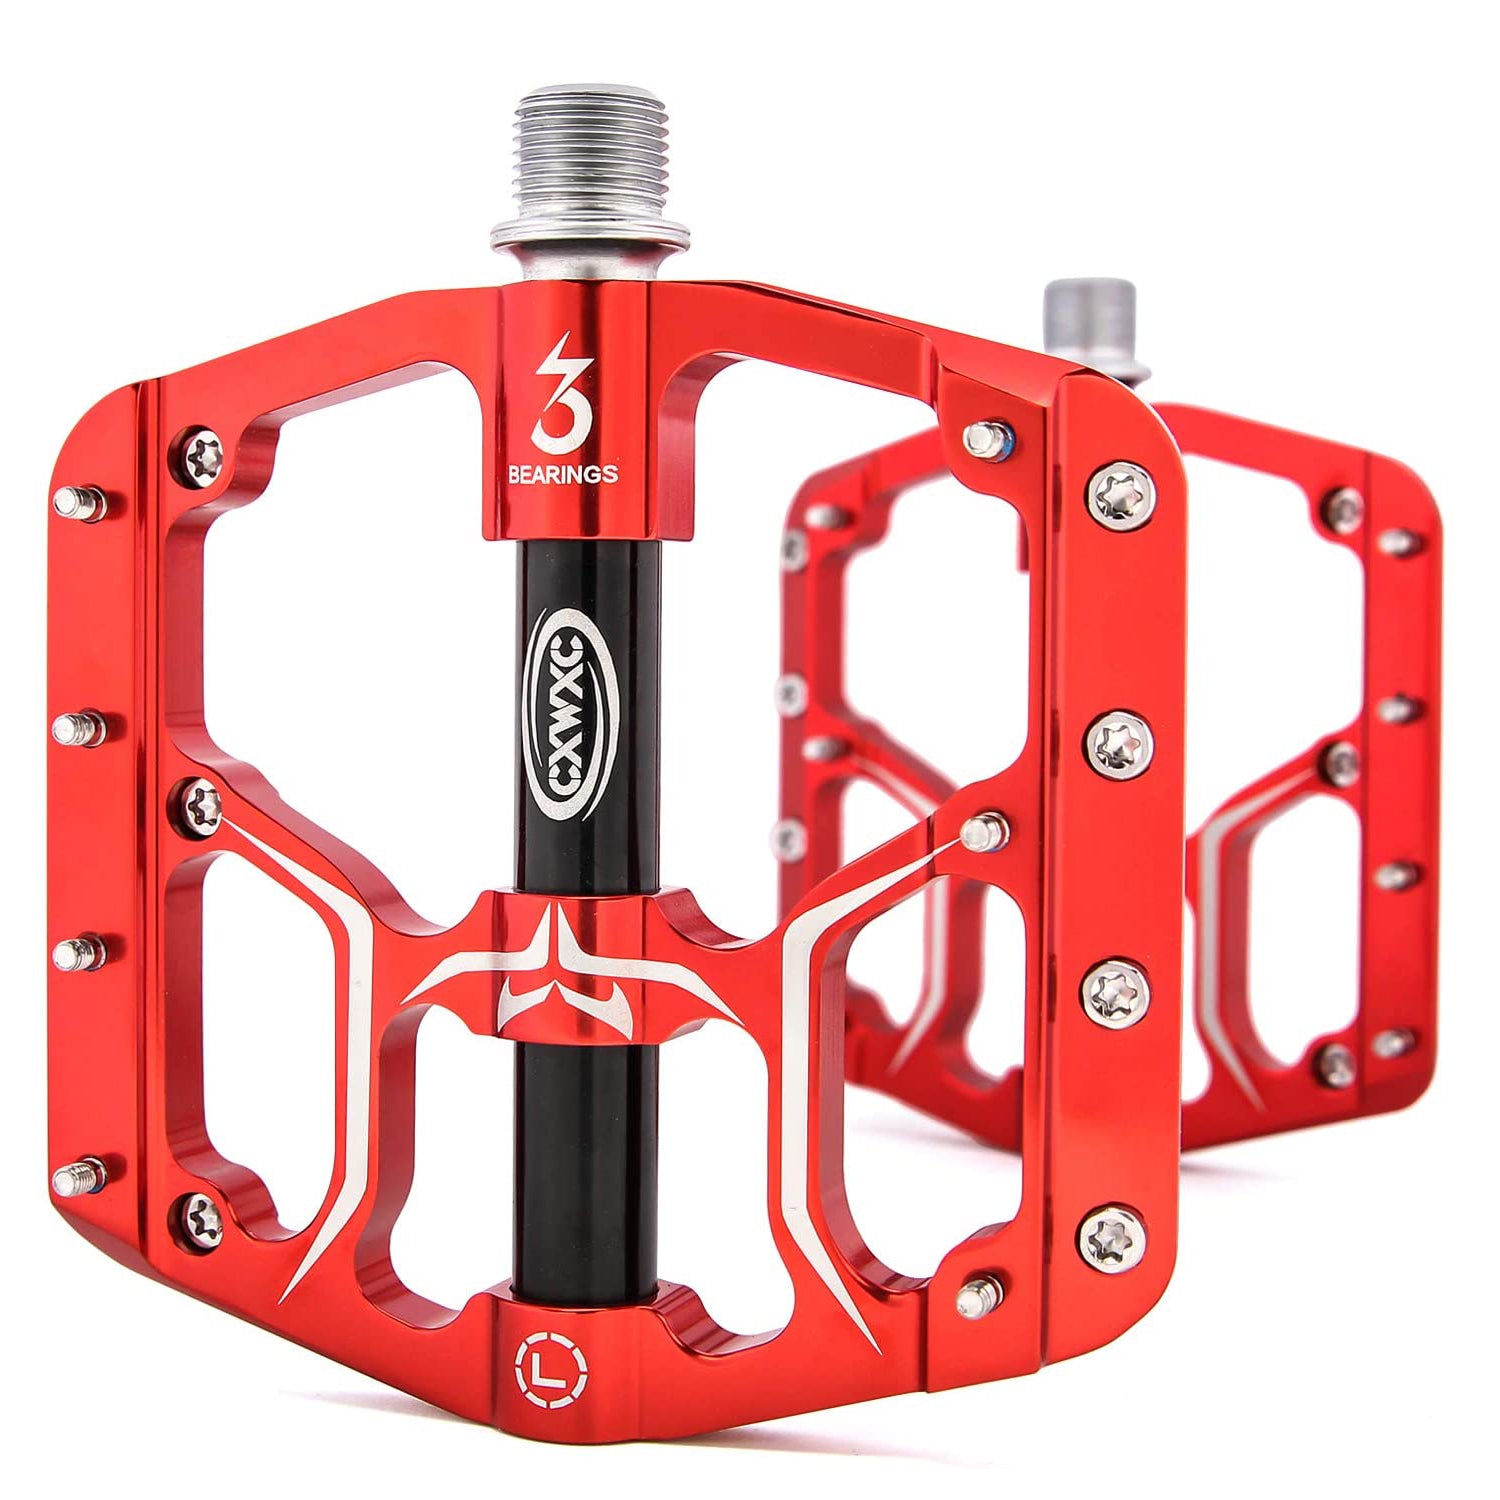 CXWXC Road/MTB Bike Pedals - 3 Bearings 9/16” Aluminum Alloy Bicycle Pedals - Mountain Bike Pedal with Removable Anti-Skid Nails